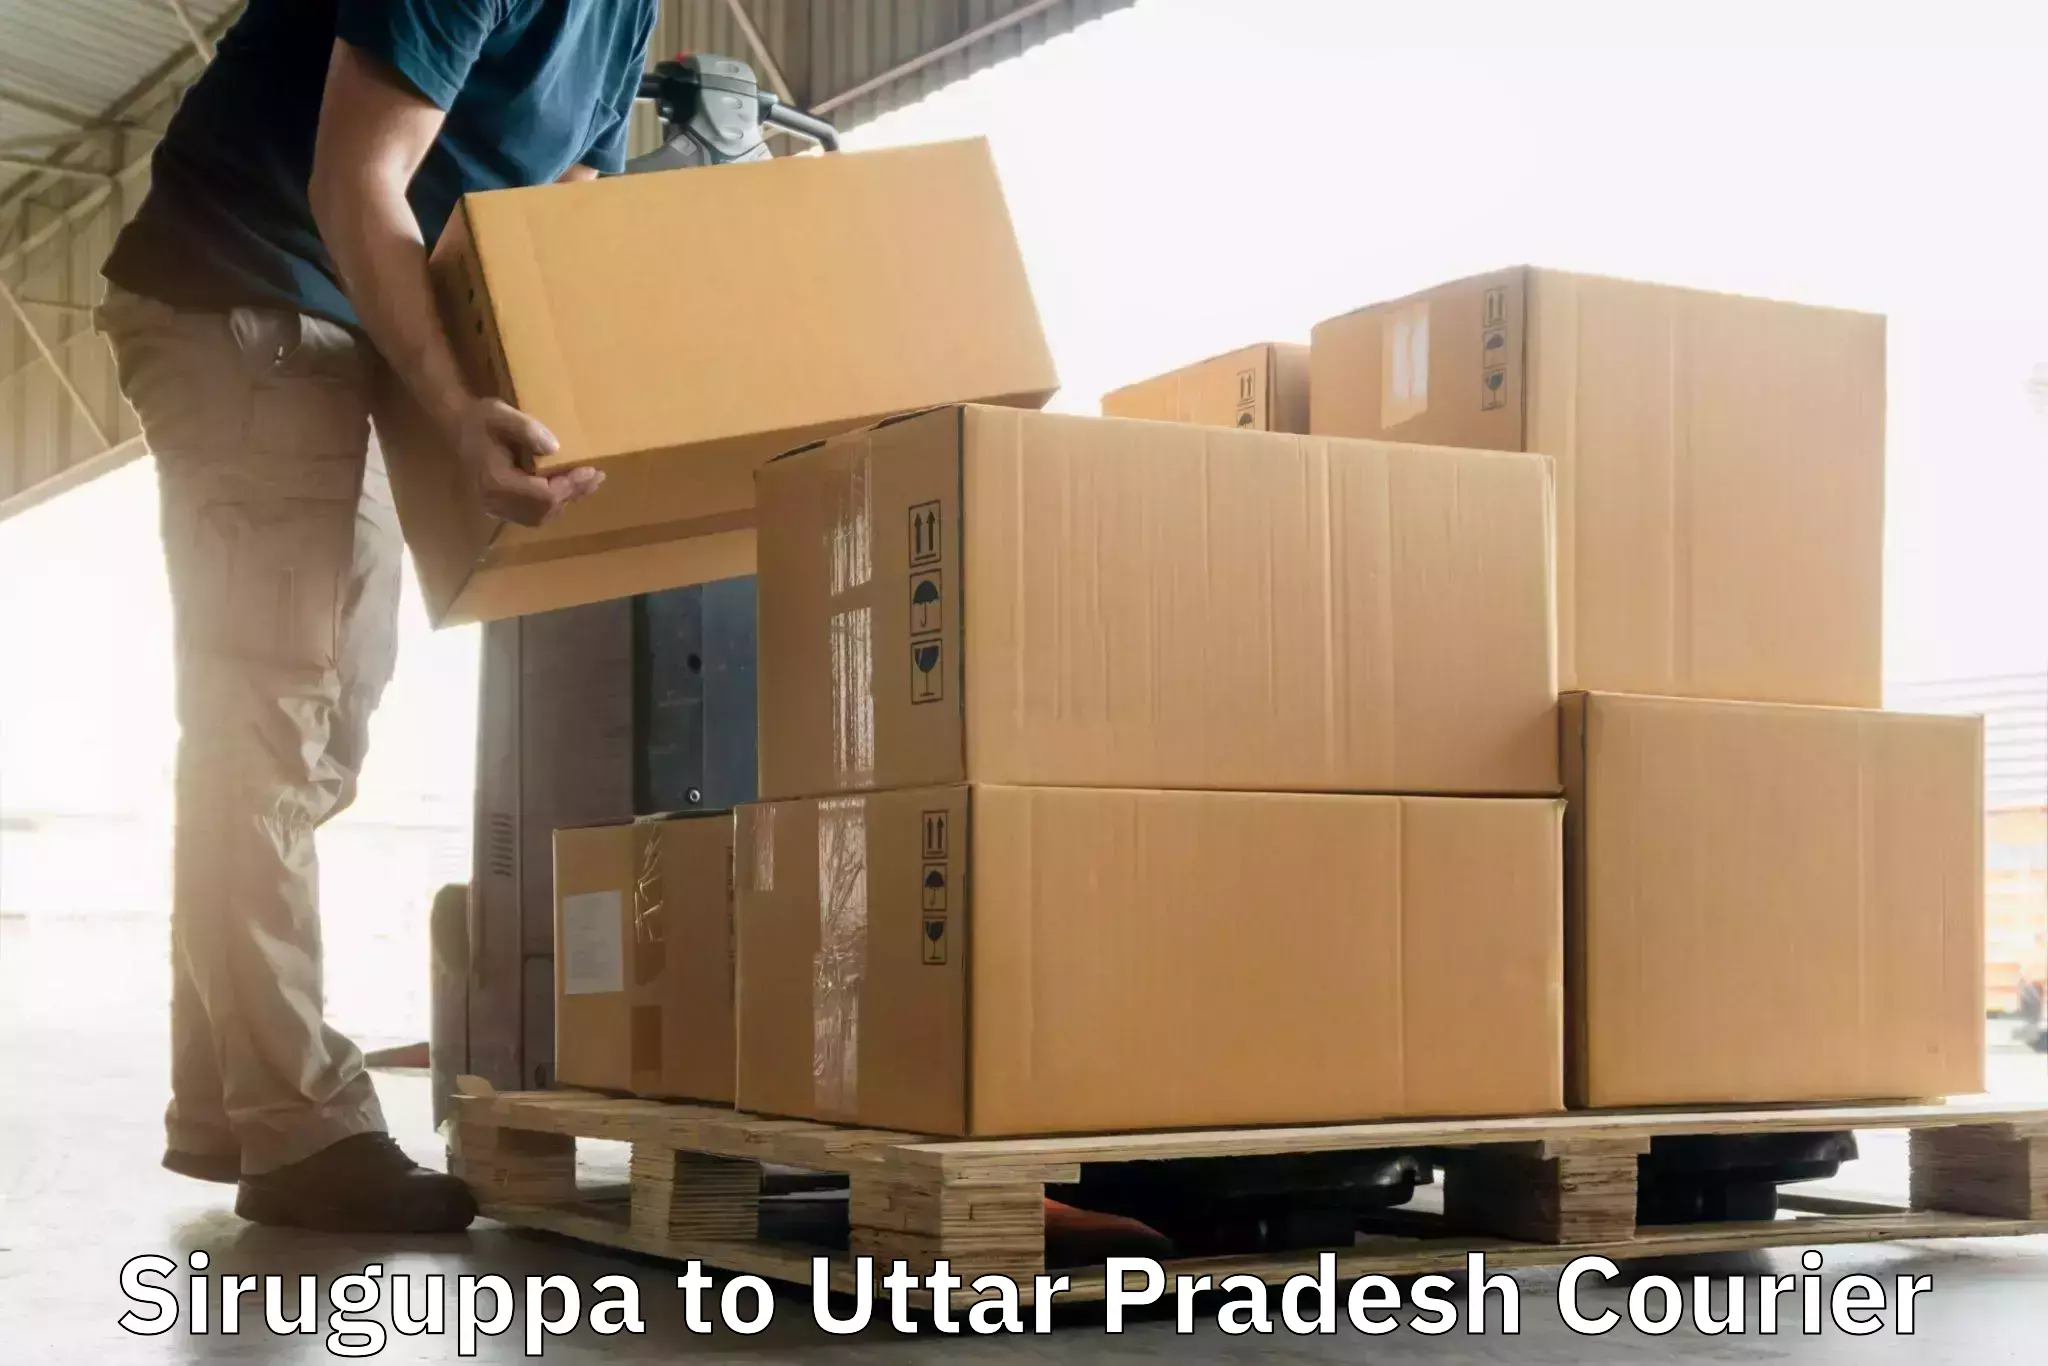 Nationwide courier service Siruguppa to Jalesar